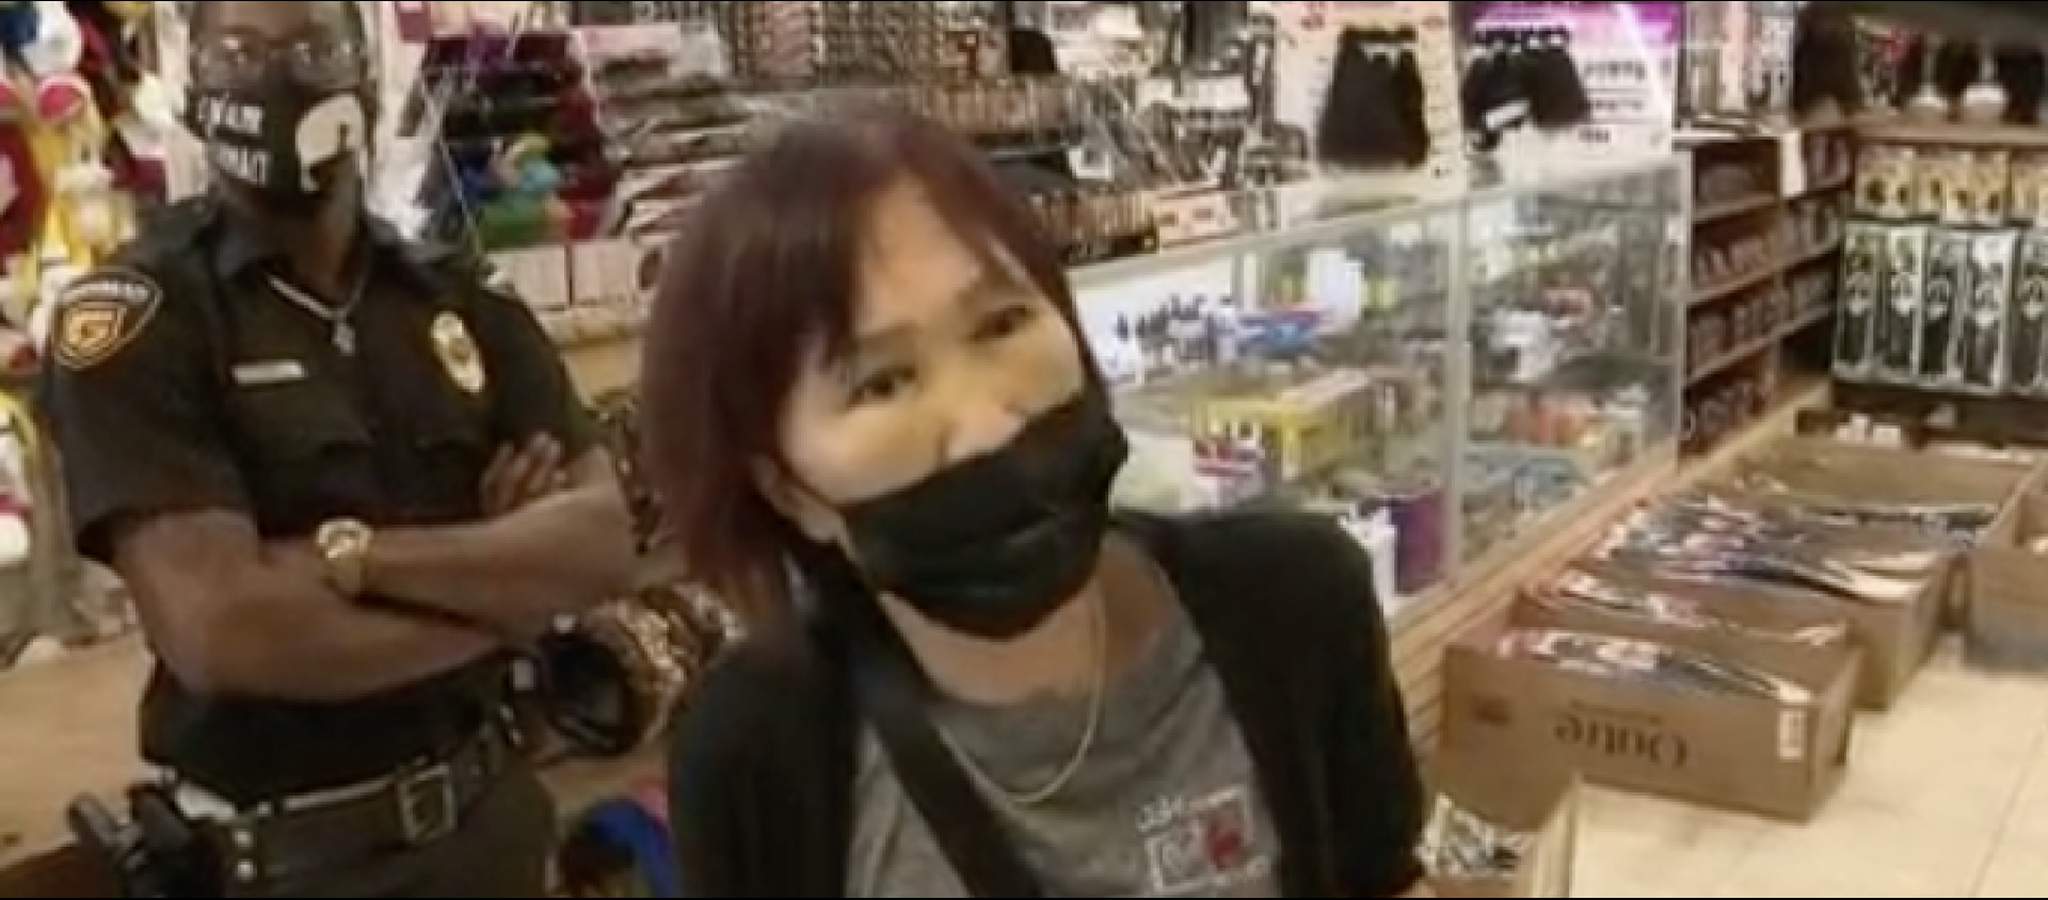 ‘You little Asian girl’: Beauty supply store owner says racial insults hurled at her during attack by customer